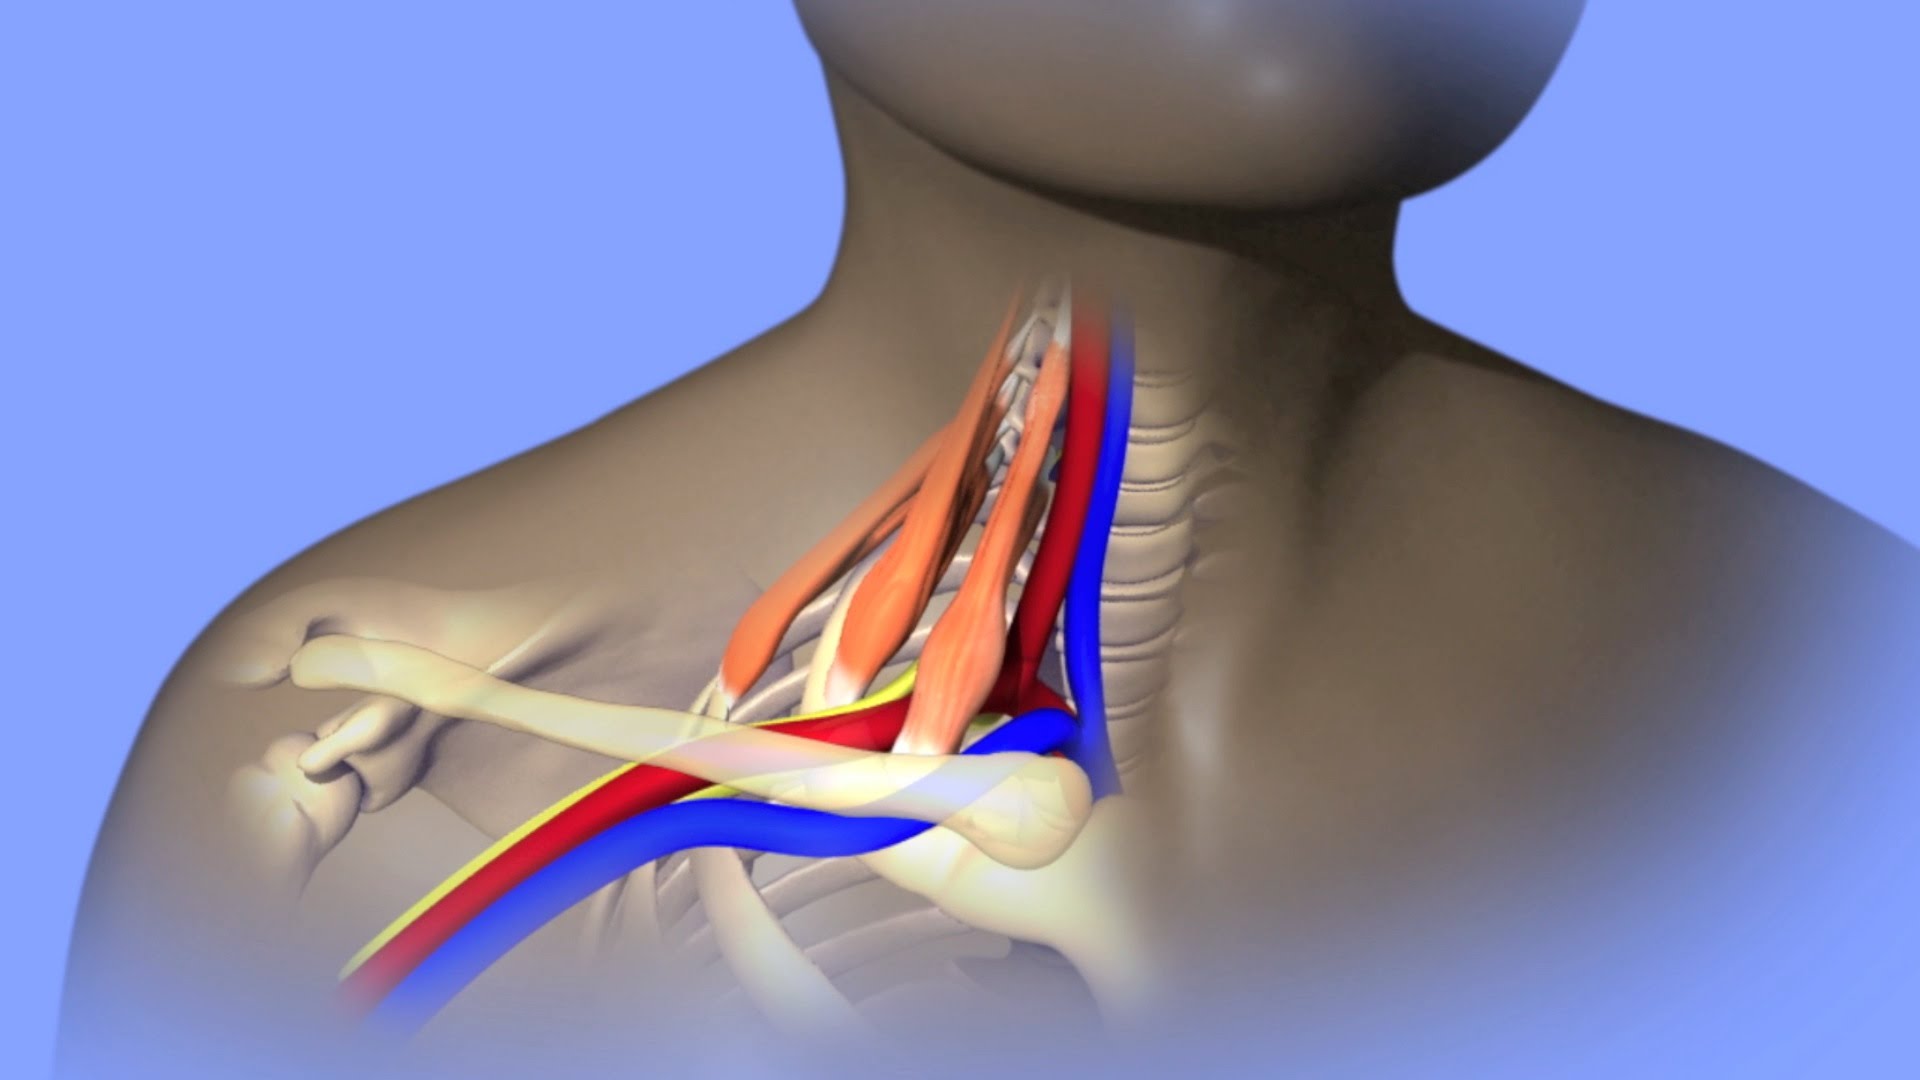 Accidents, Technology, and Thoracic Outlet Syndrome